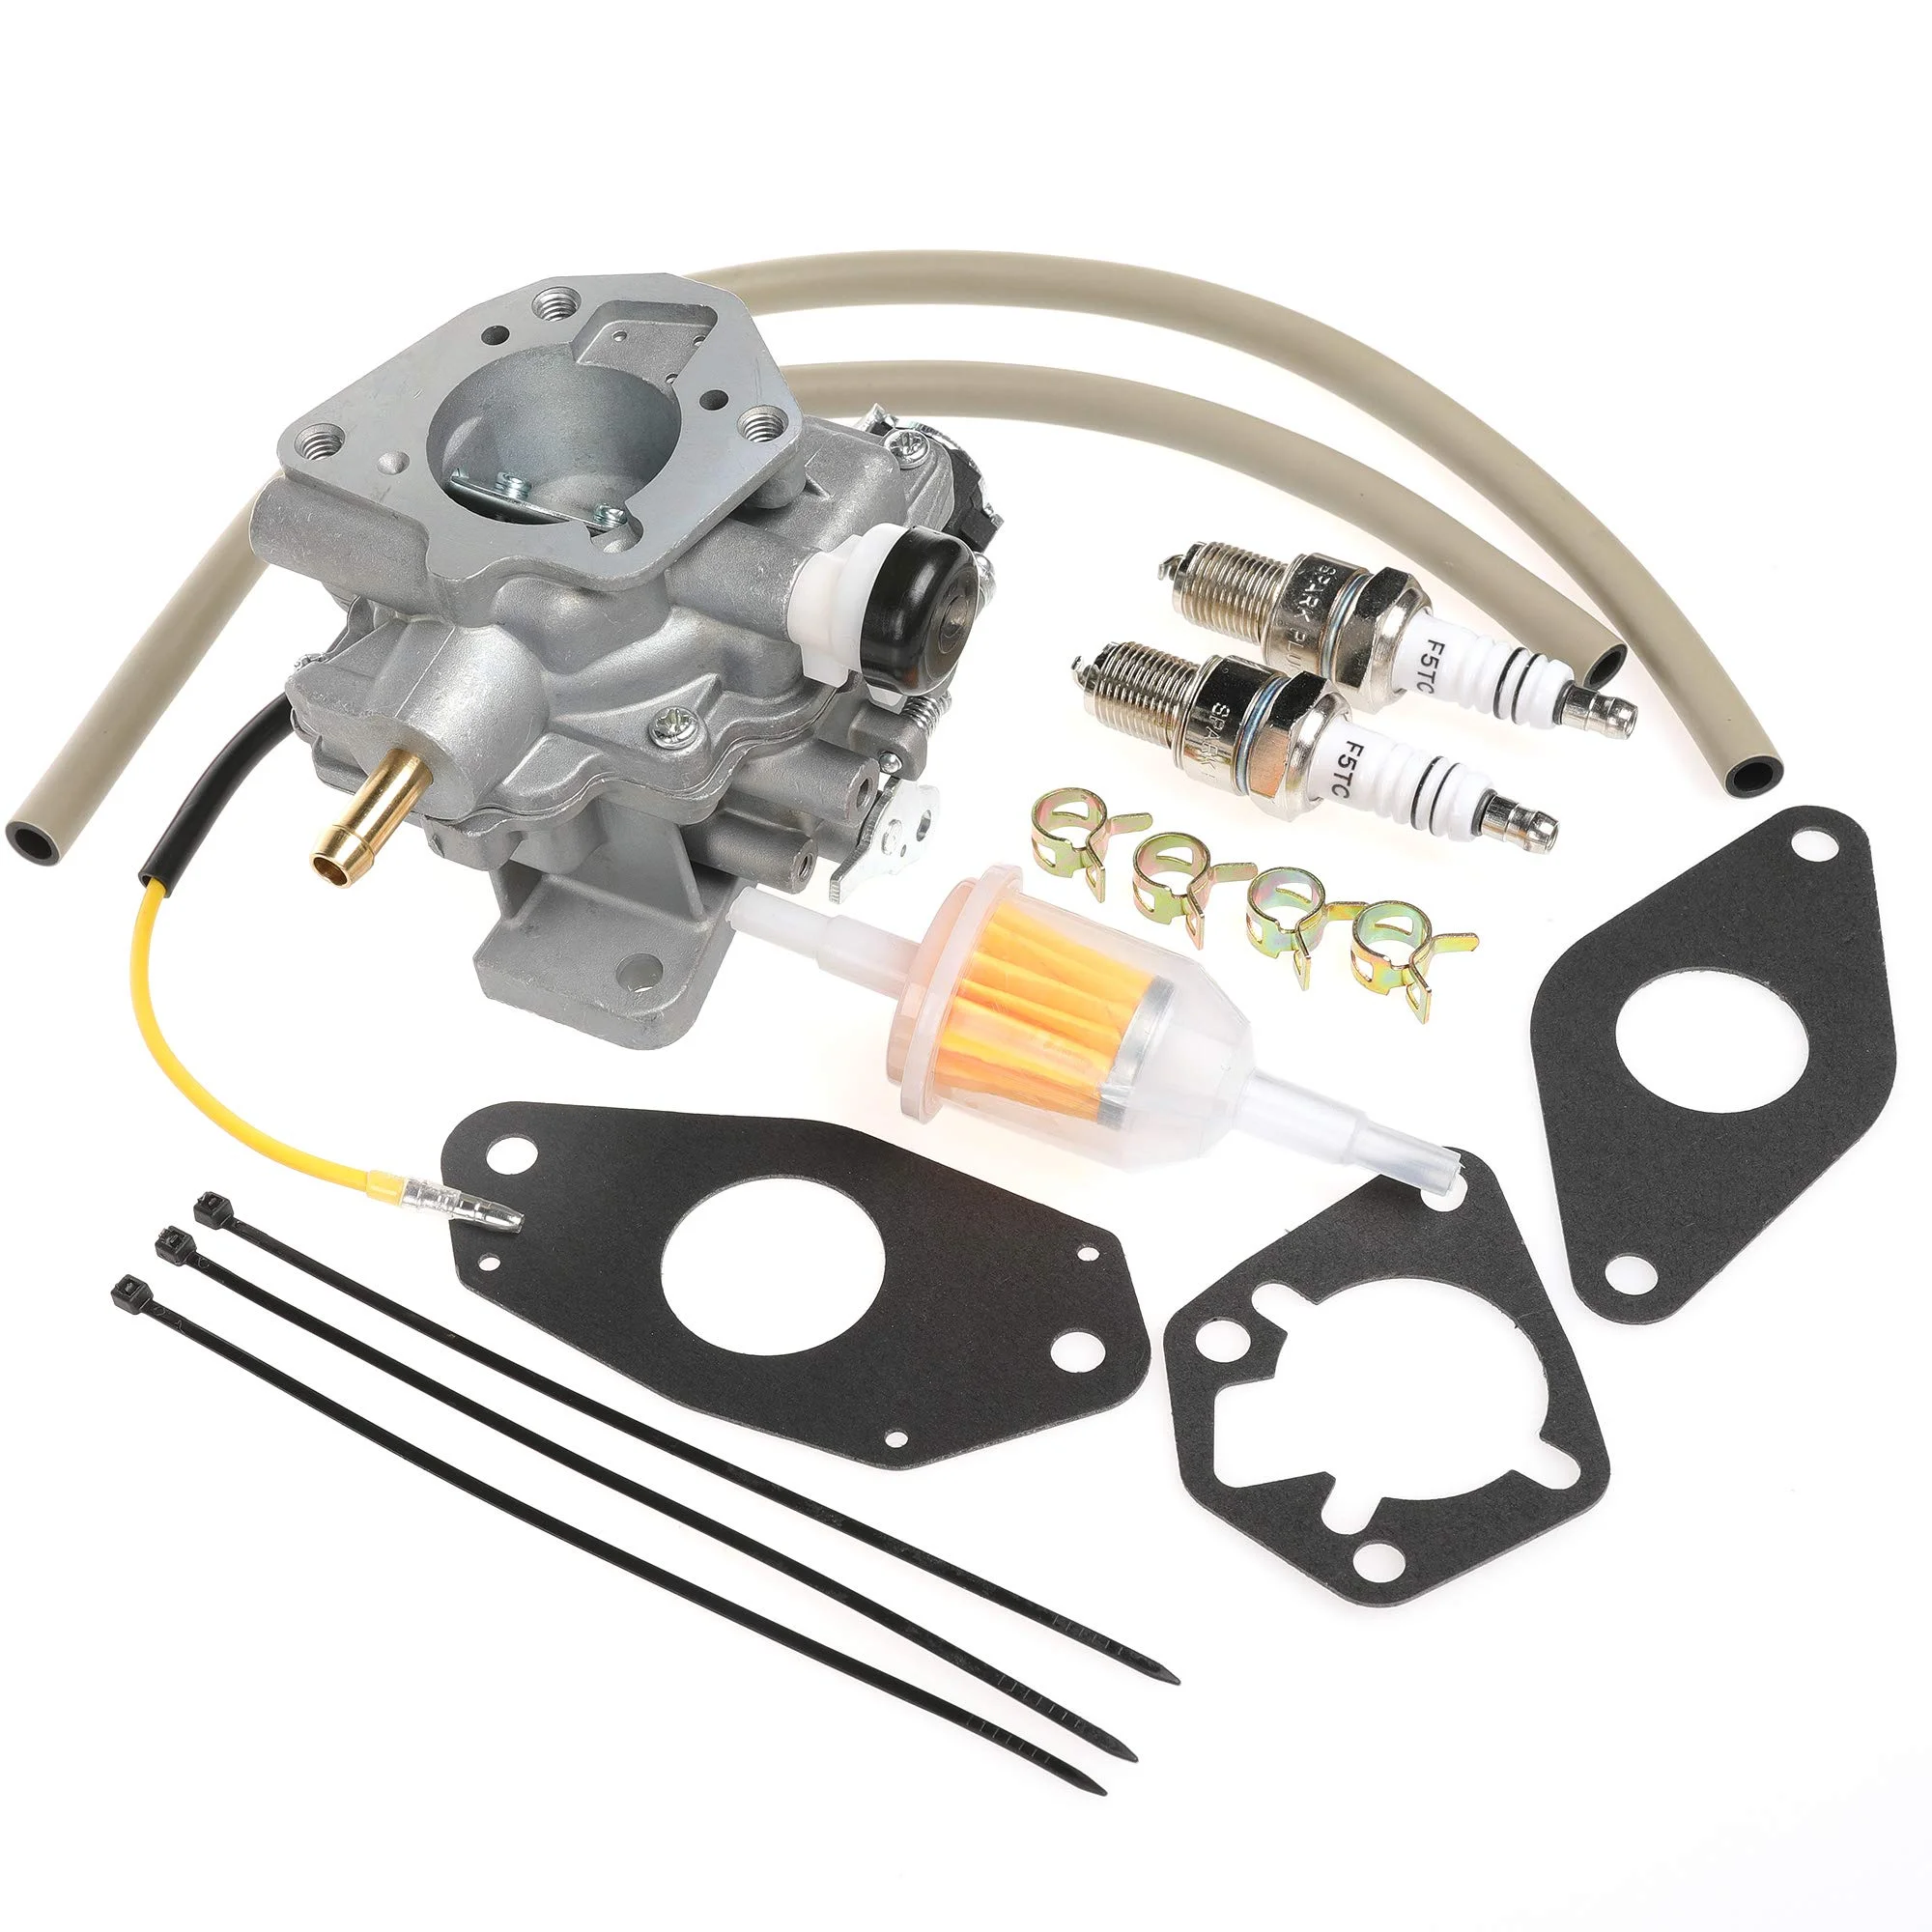 

2485332-S Carburetor for Kohler CH18 CH18S CH20 CH22 CH23 Engine Models Replaces 2485335-S